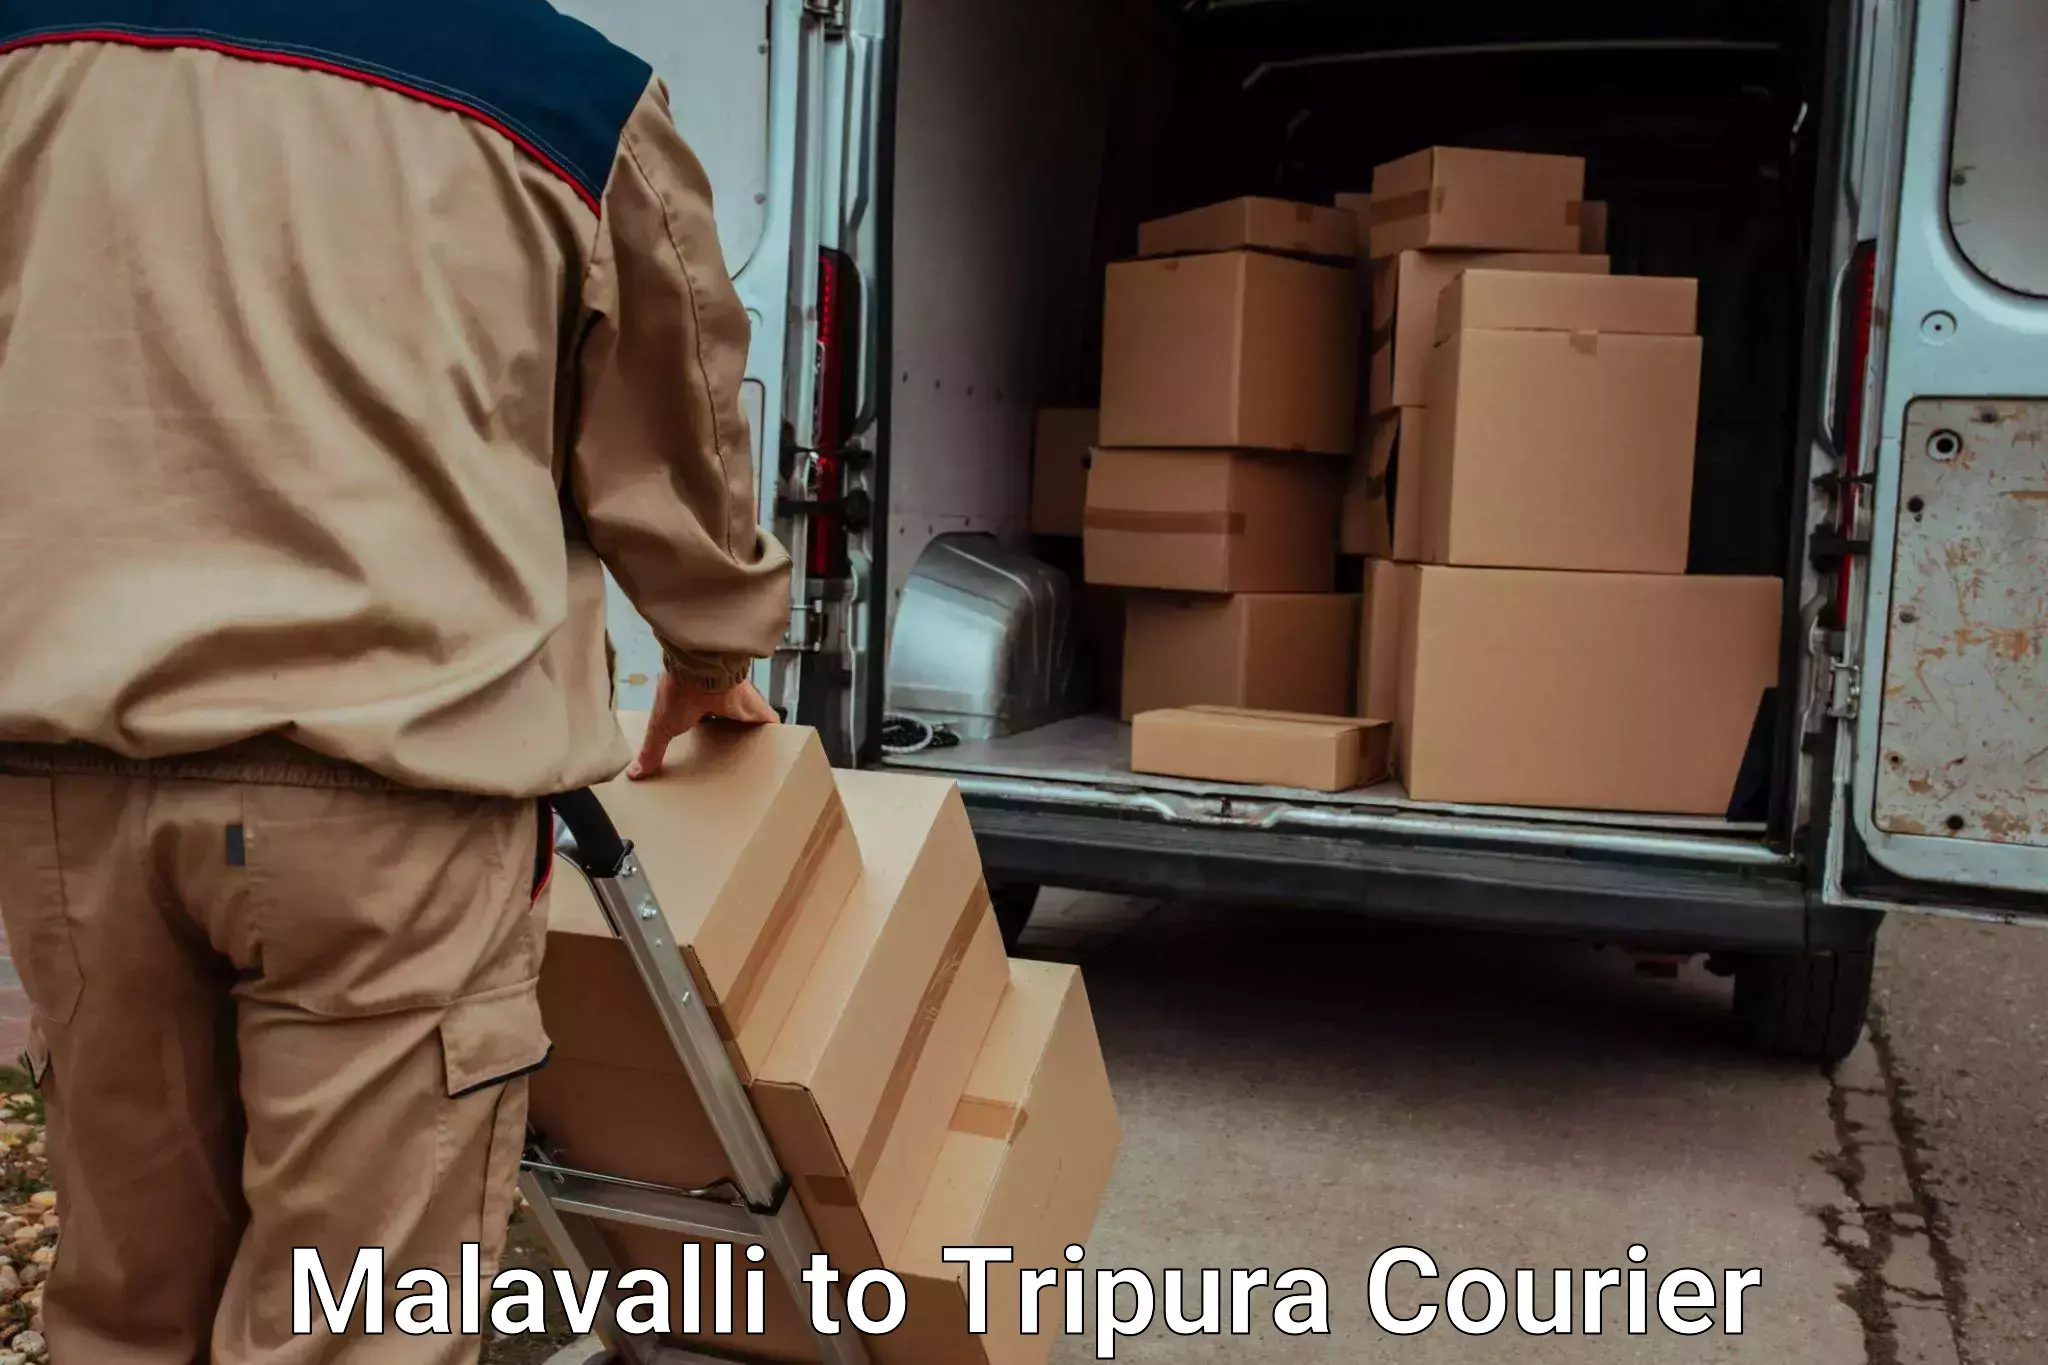 Personal effects shipping Malavalli to Udaipur Tripura